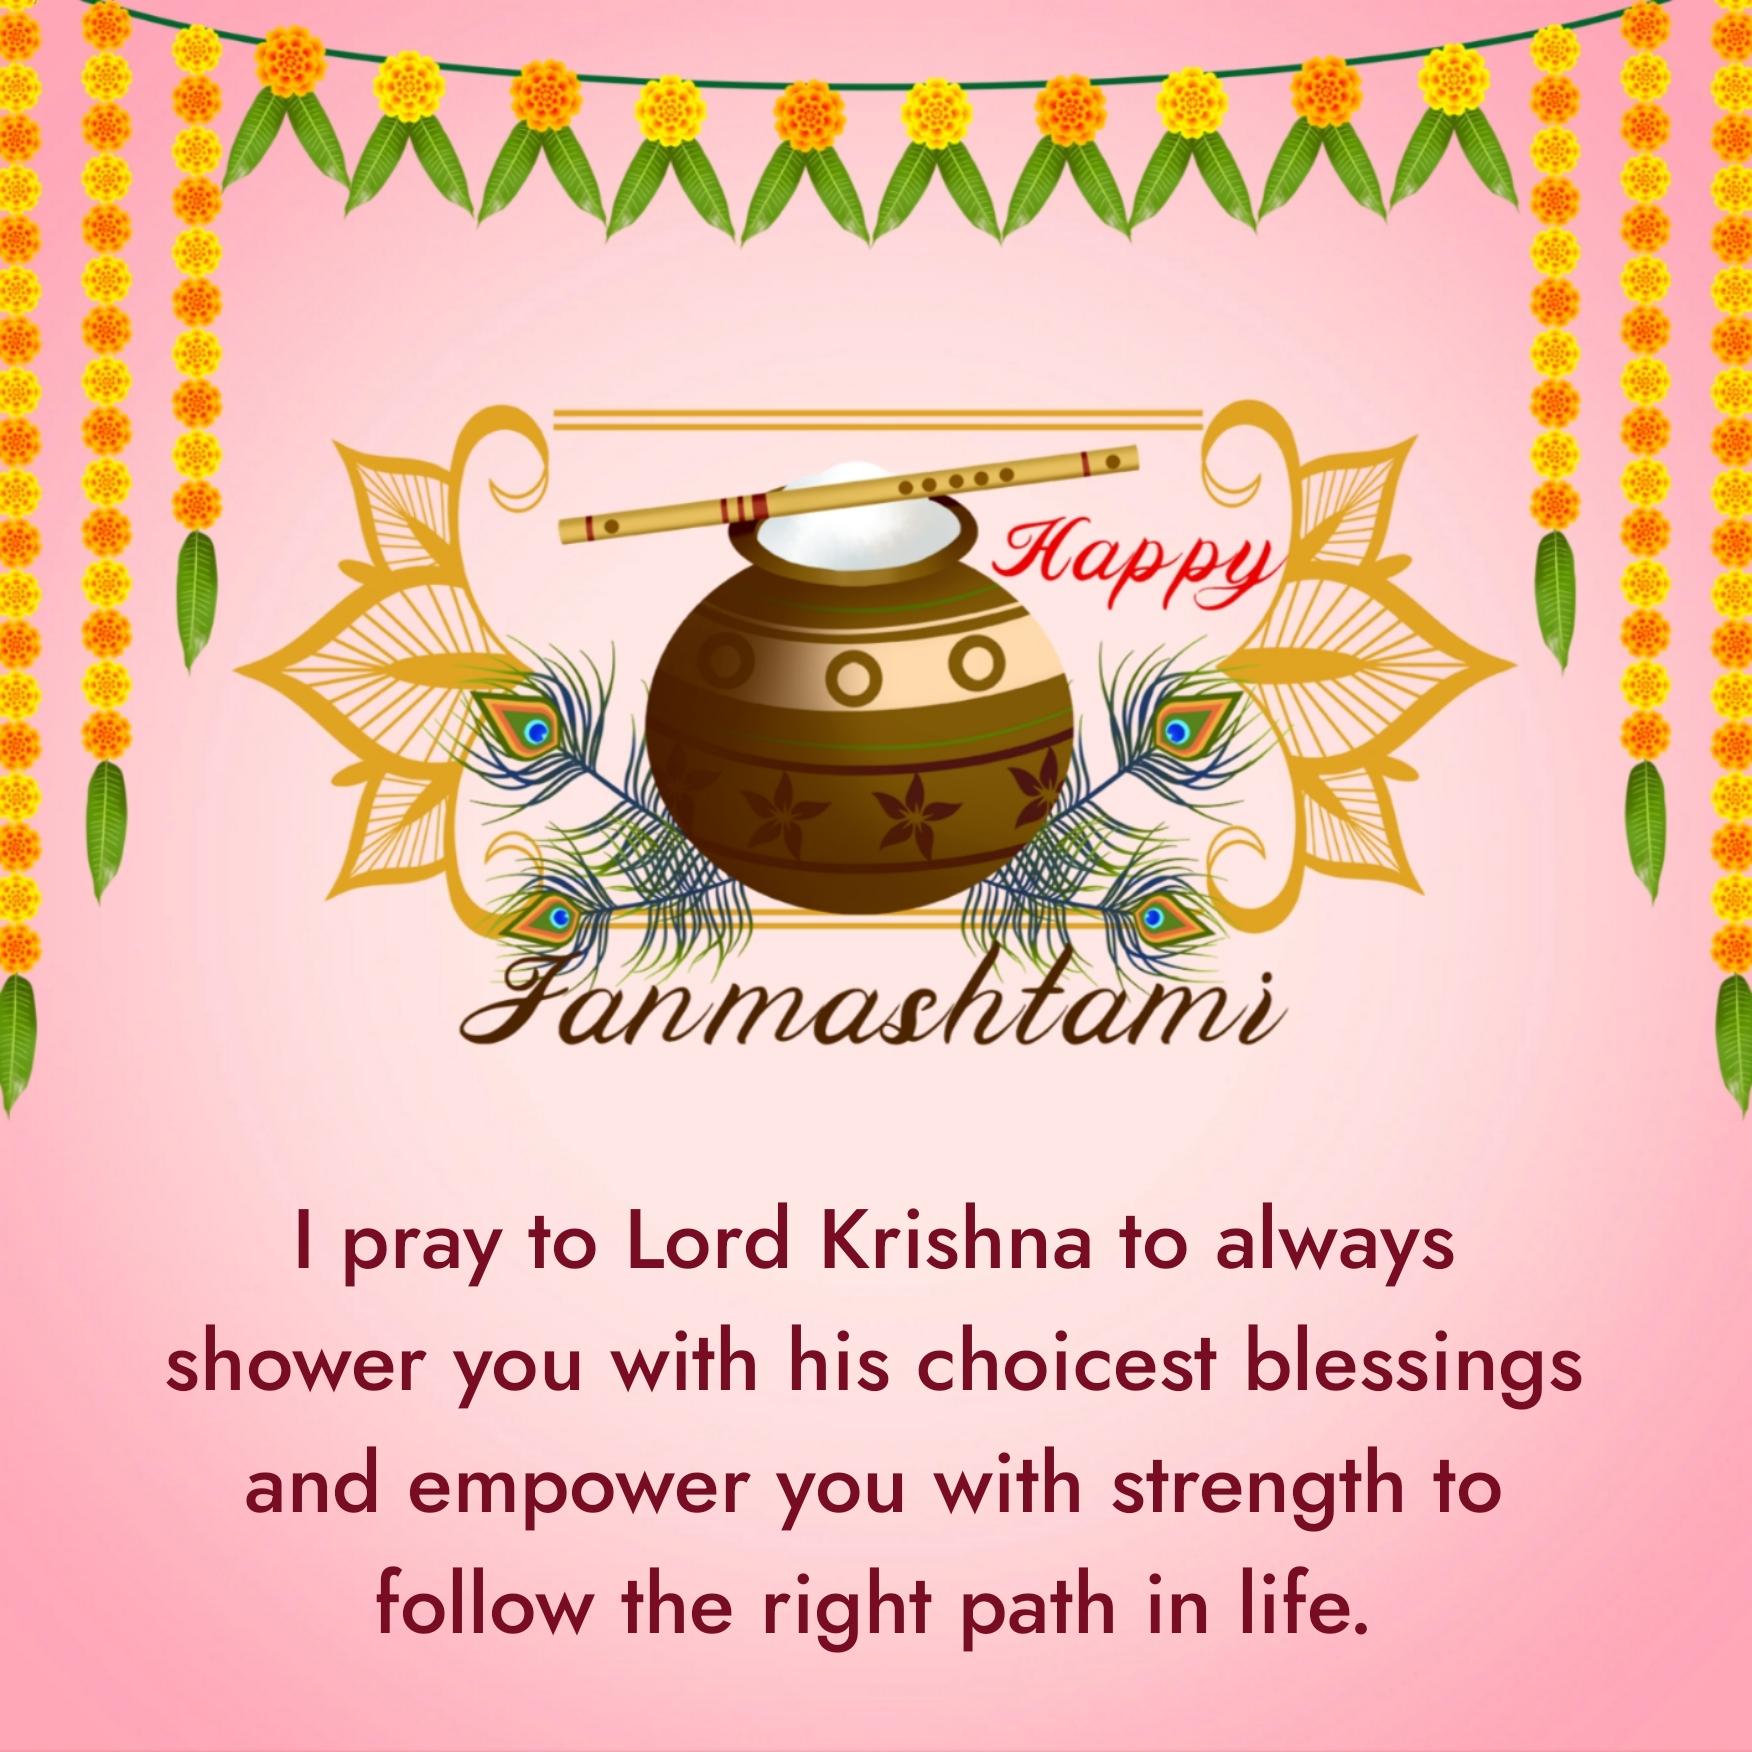 I pray to Lord Krishna to always shower you with his choicest blessings